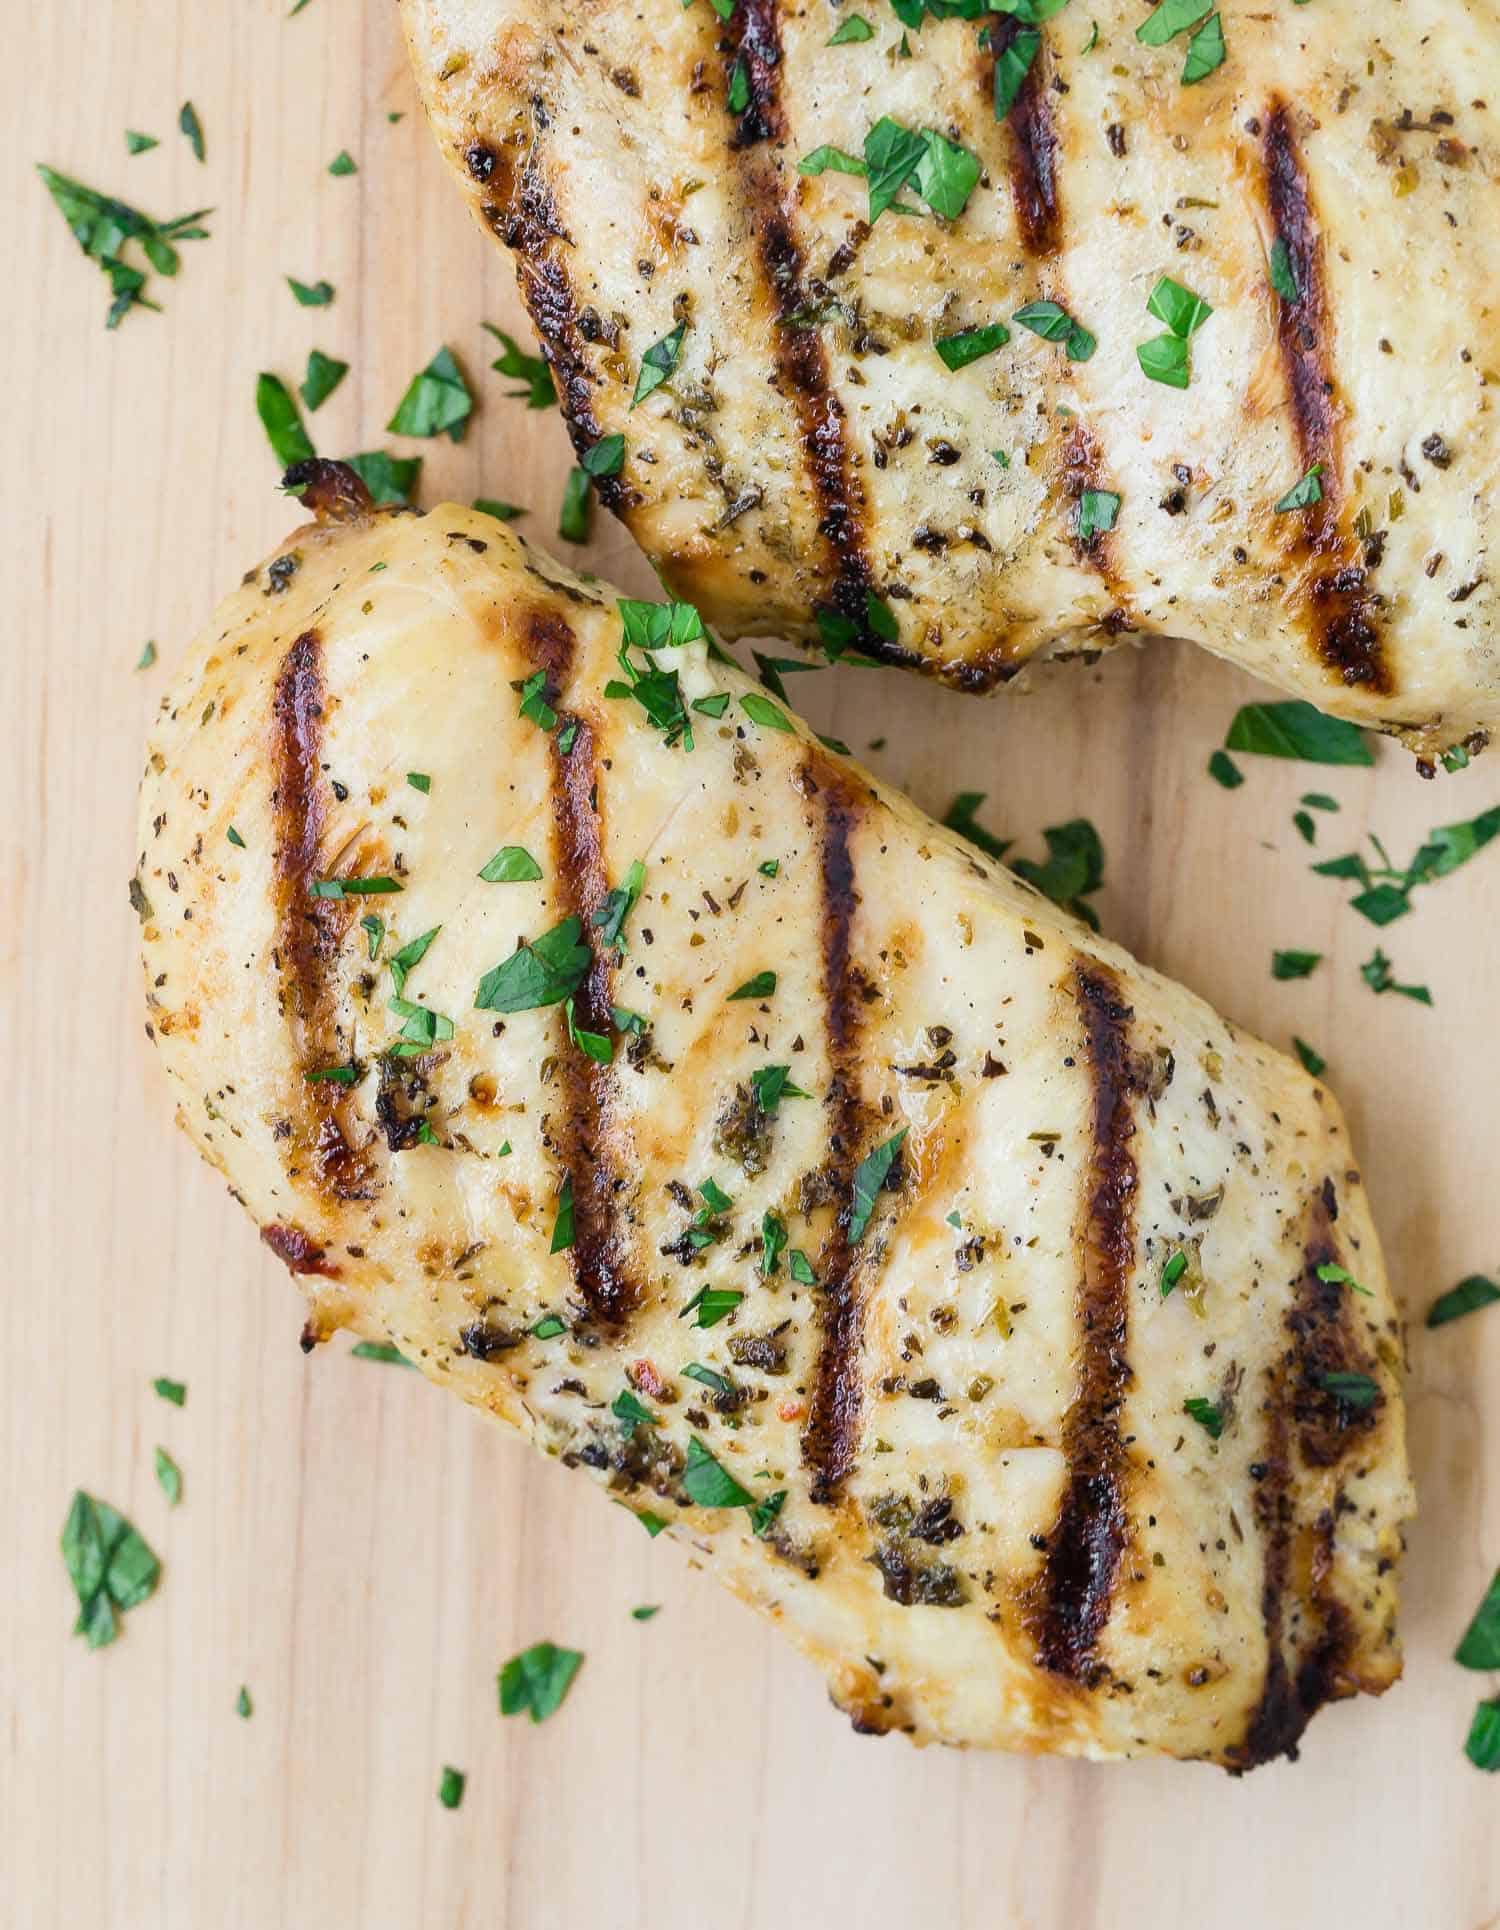 Overhead view of grilled chicken breasts on a wooden cutting board, sprinkled with fresh parsley.